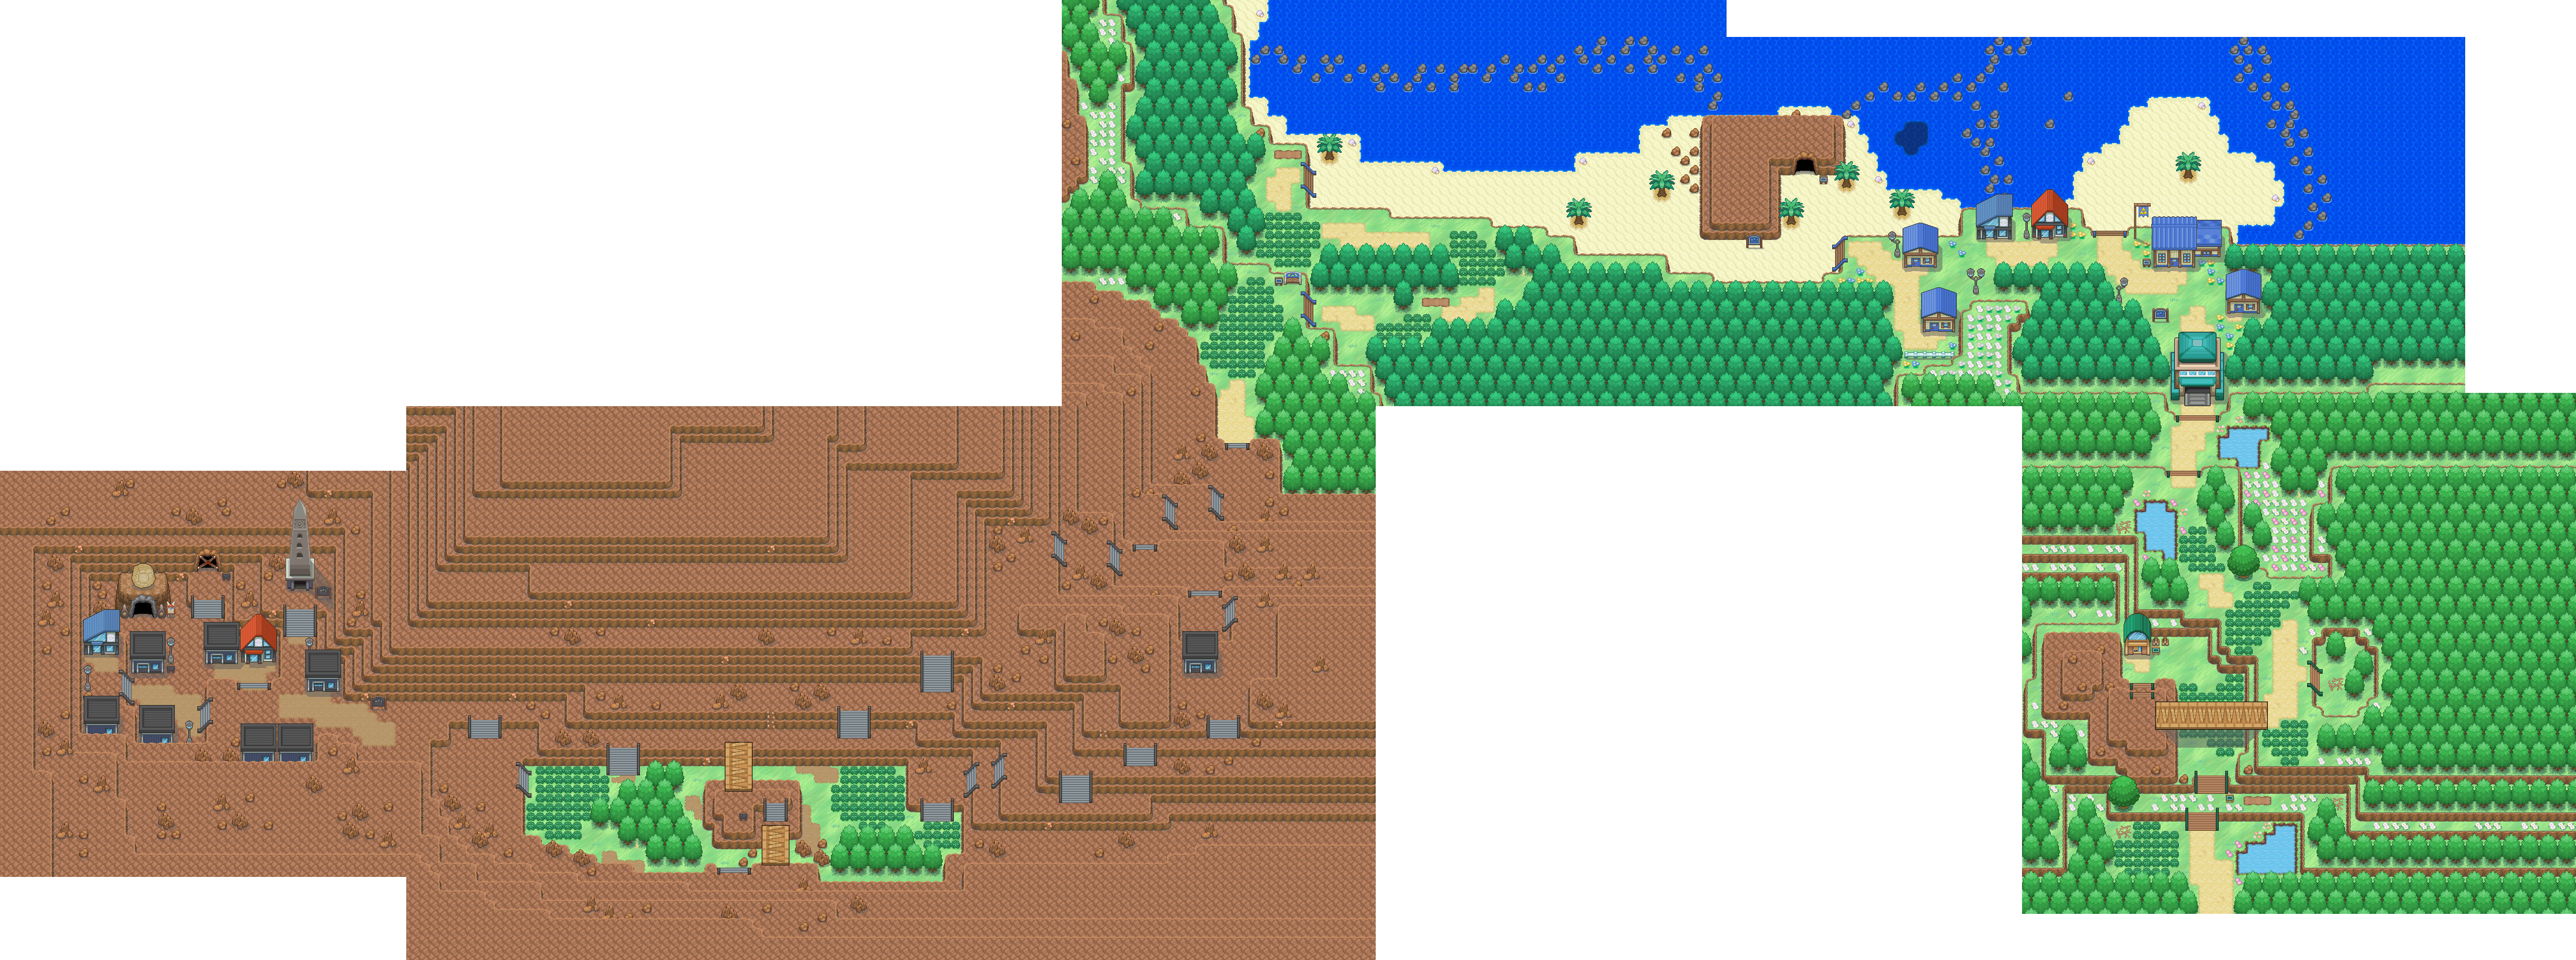 zela_region_map__part_2__by_rayd12smitty-d8tetm5.png